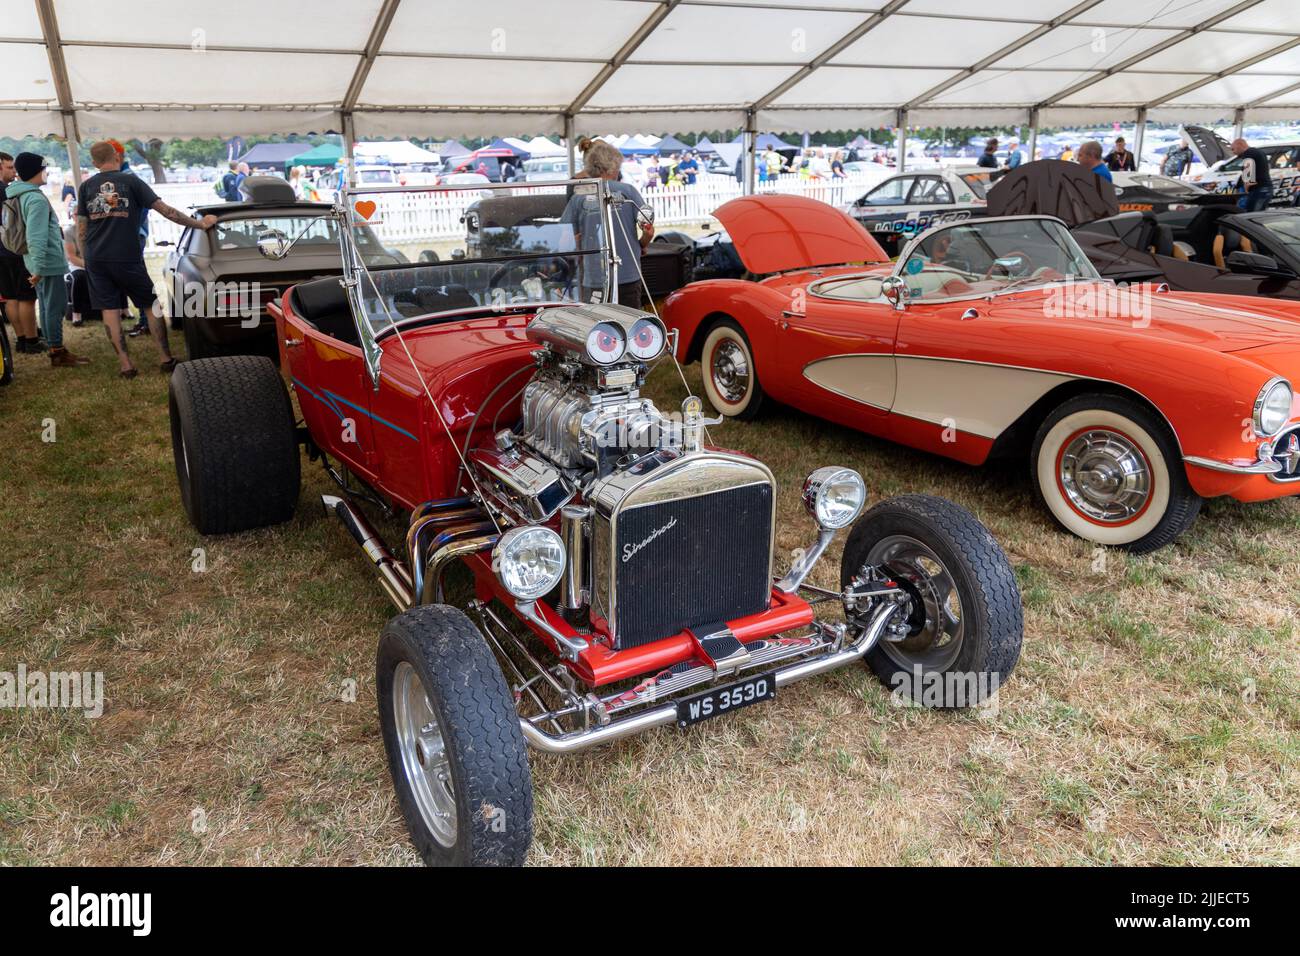 Red Ford 'Streetrod' car at CarFest Stock Photo